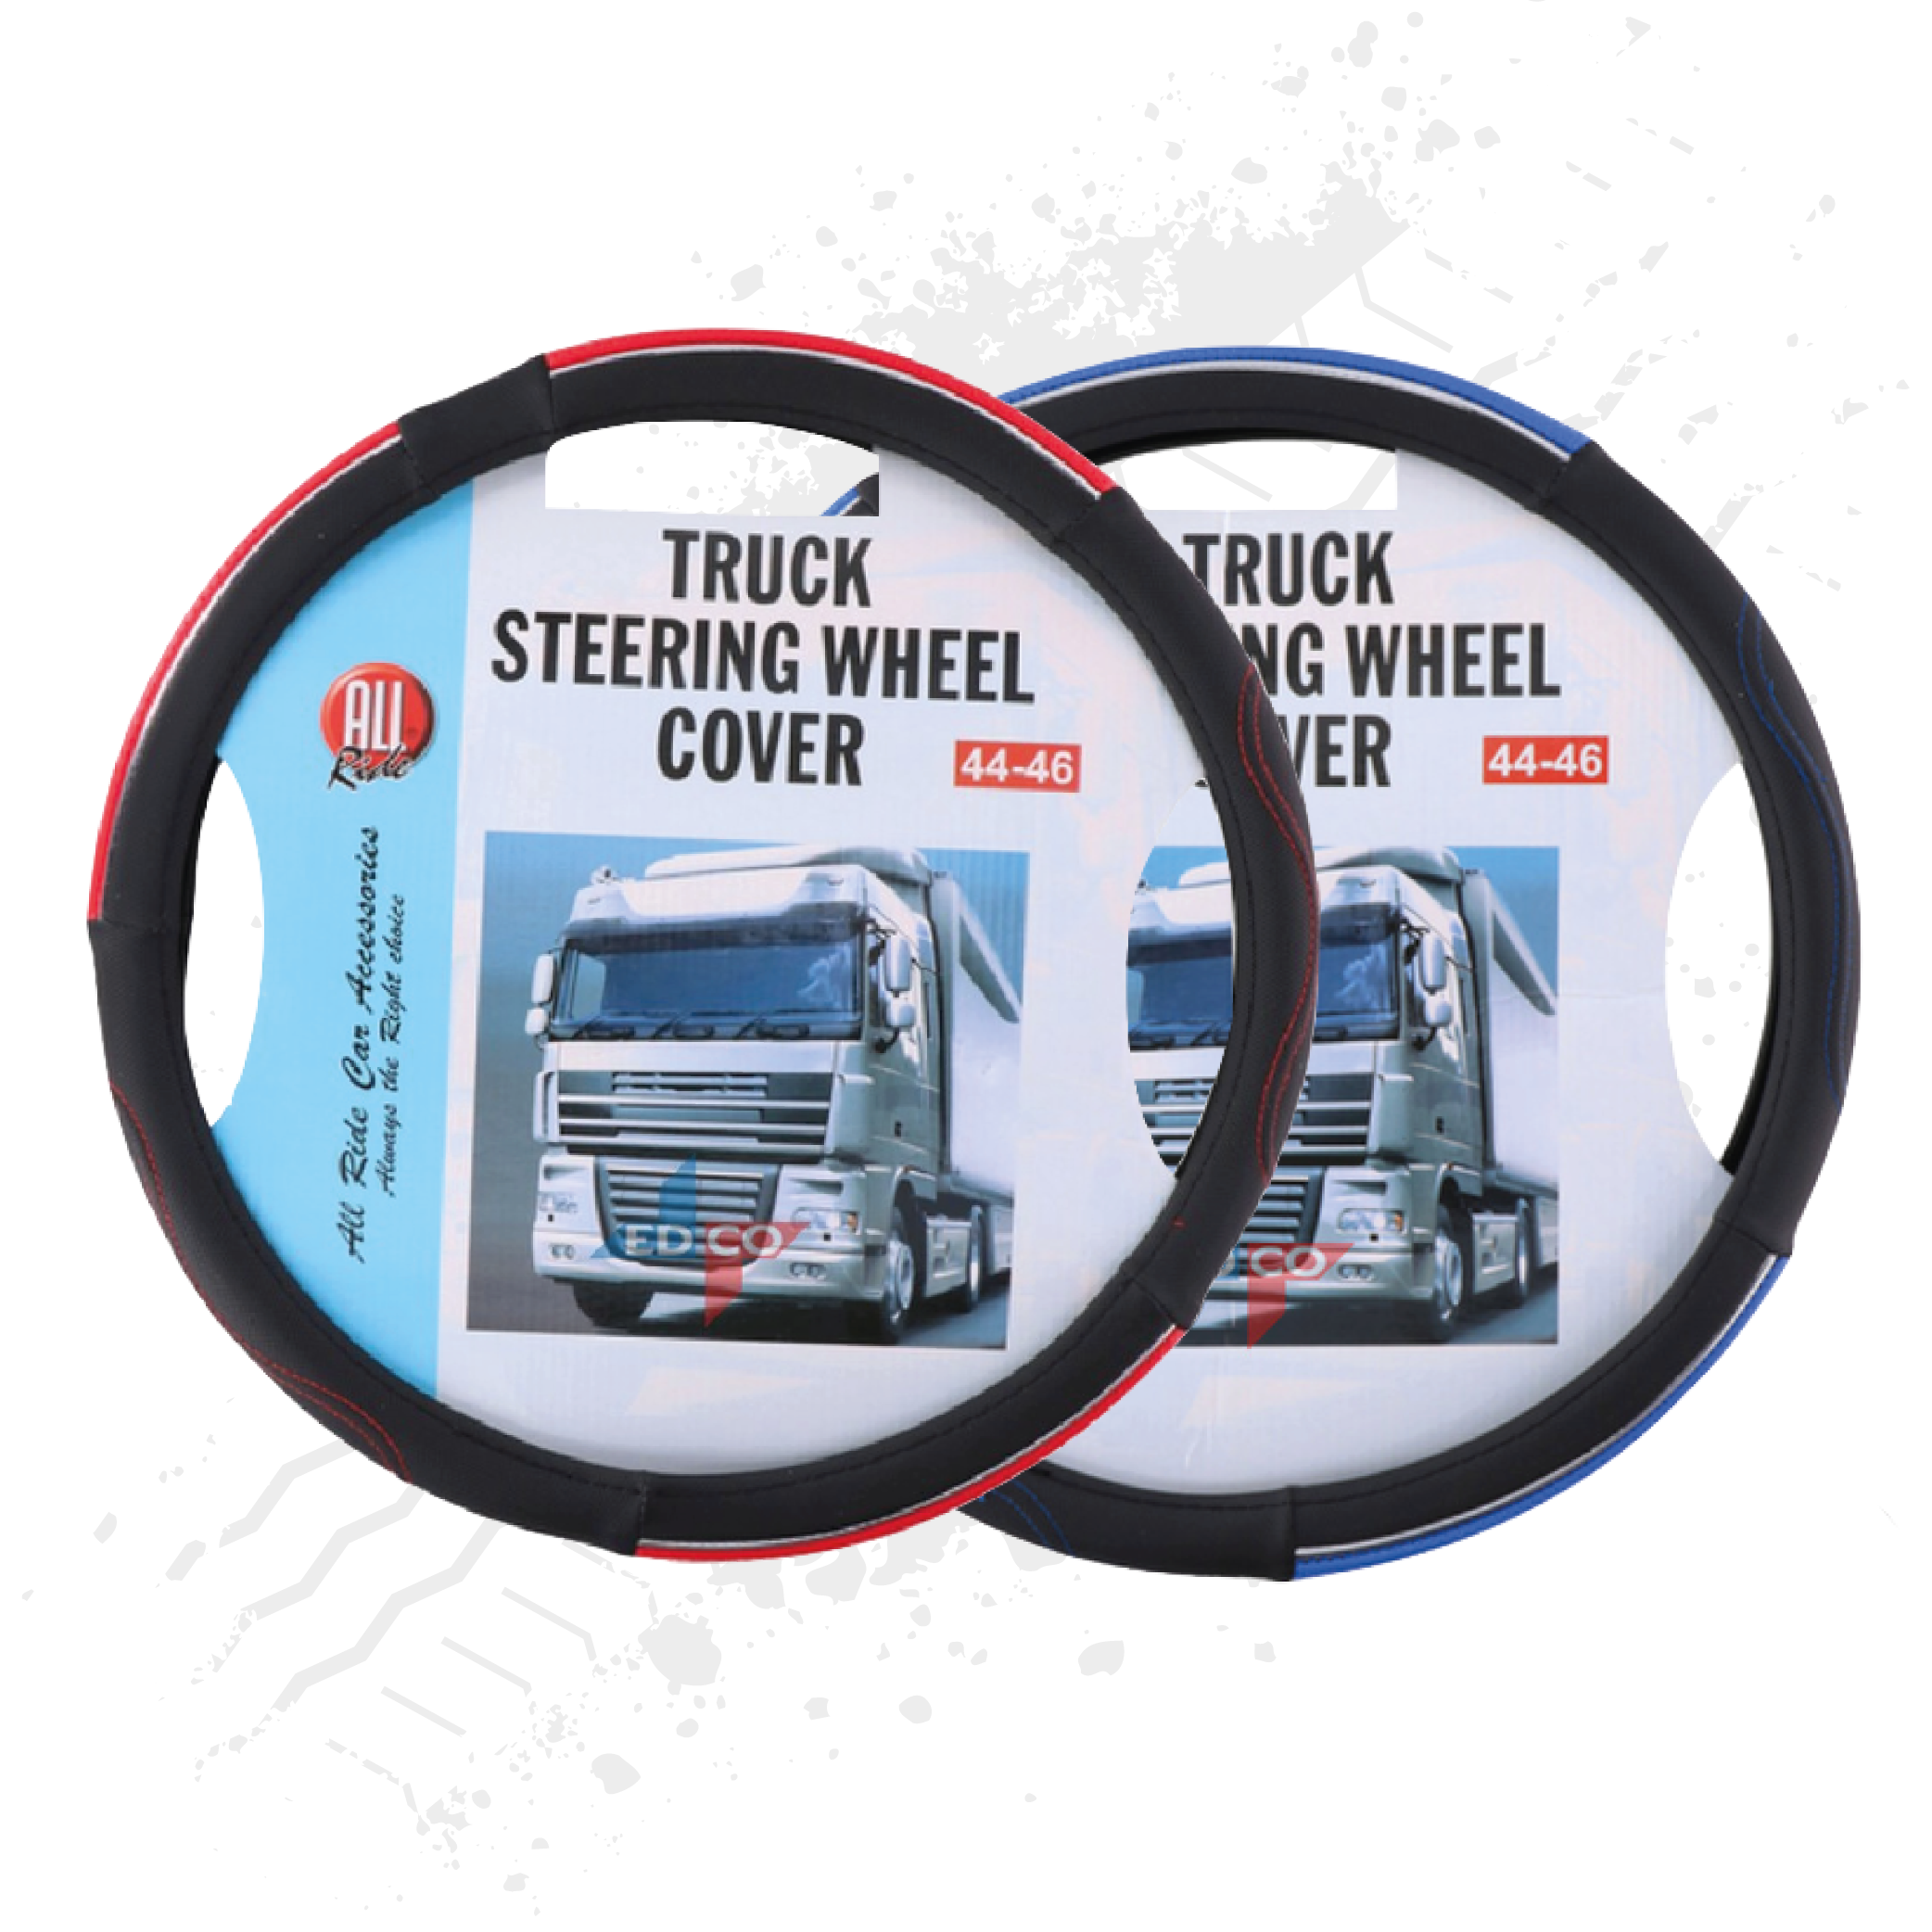 P And S Serie,BLACKBLUE,45CM ZJWZ Truck Auto Automobile Vehicle Automotive Truck Steering Wheel Cover For Universal Size 42-50CM Scania R 